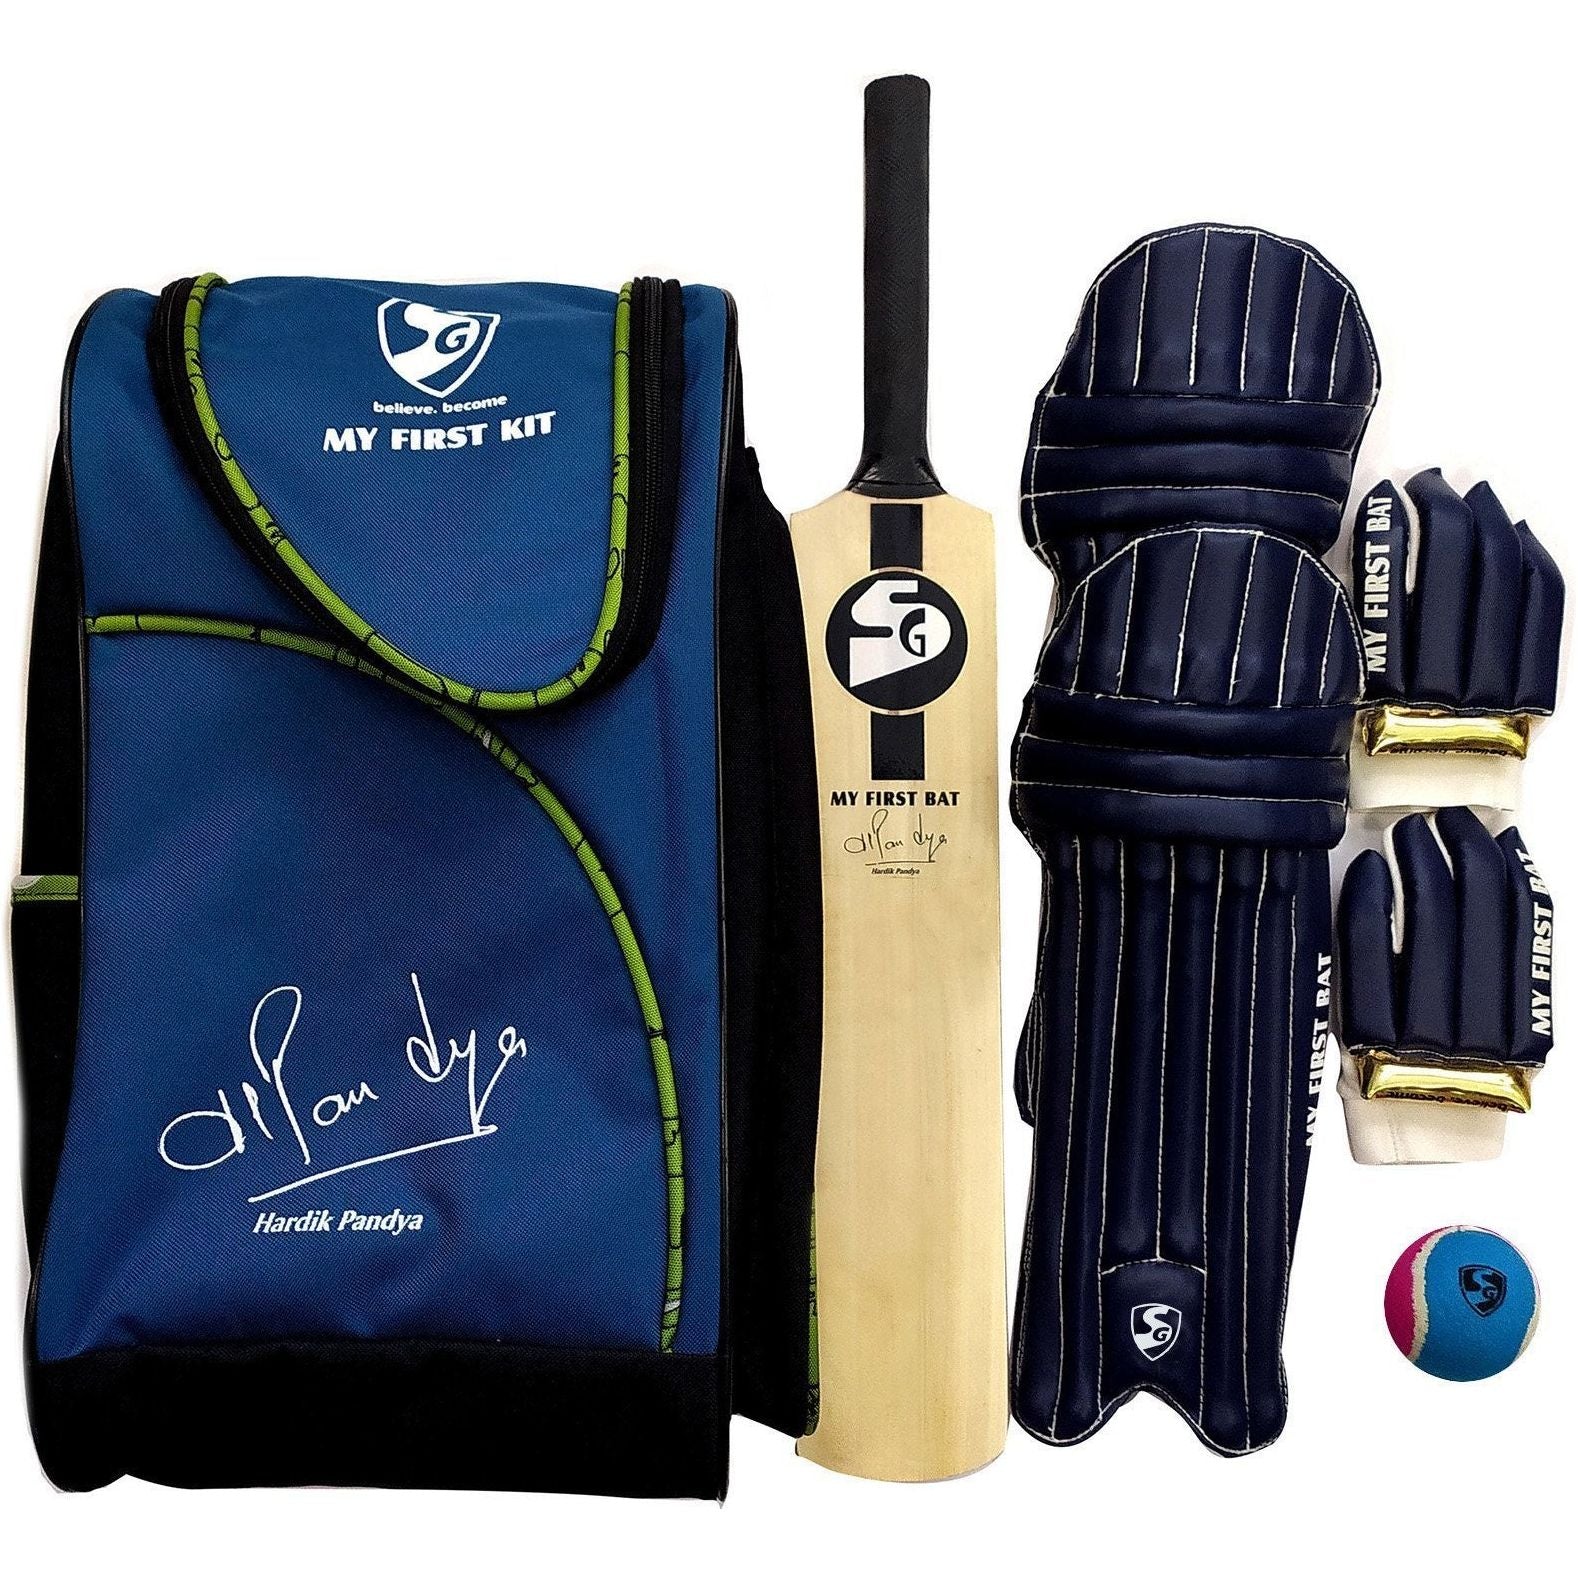 SG My First Kit Junior / Youth Cricket Set for 3 to 5 Years Old